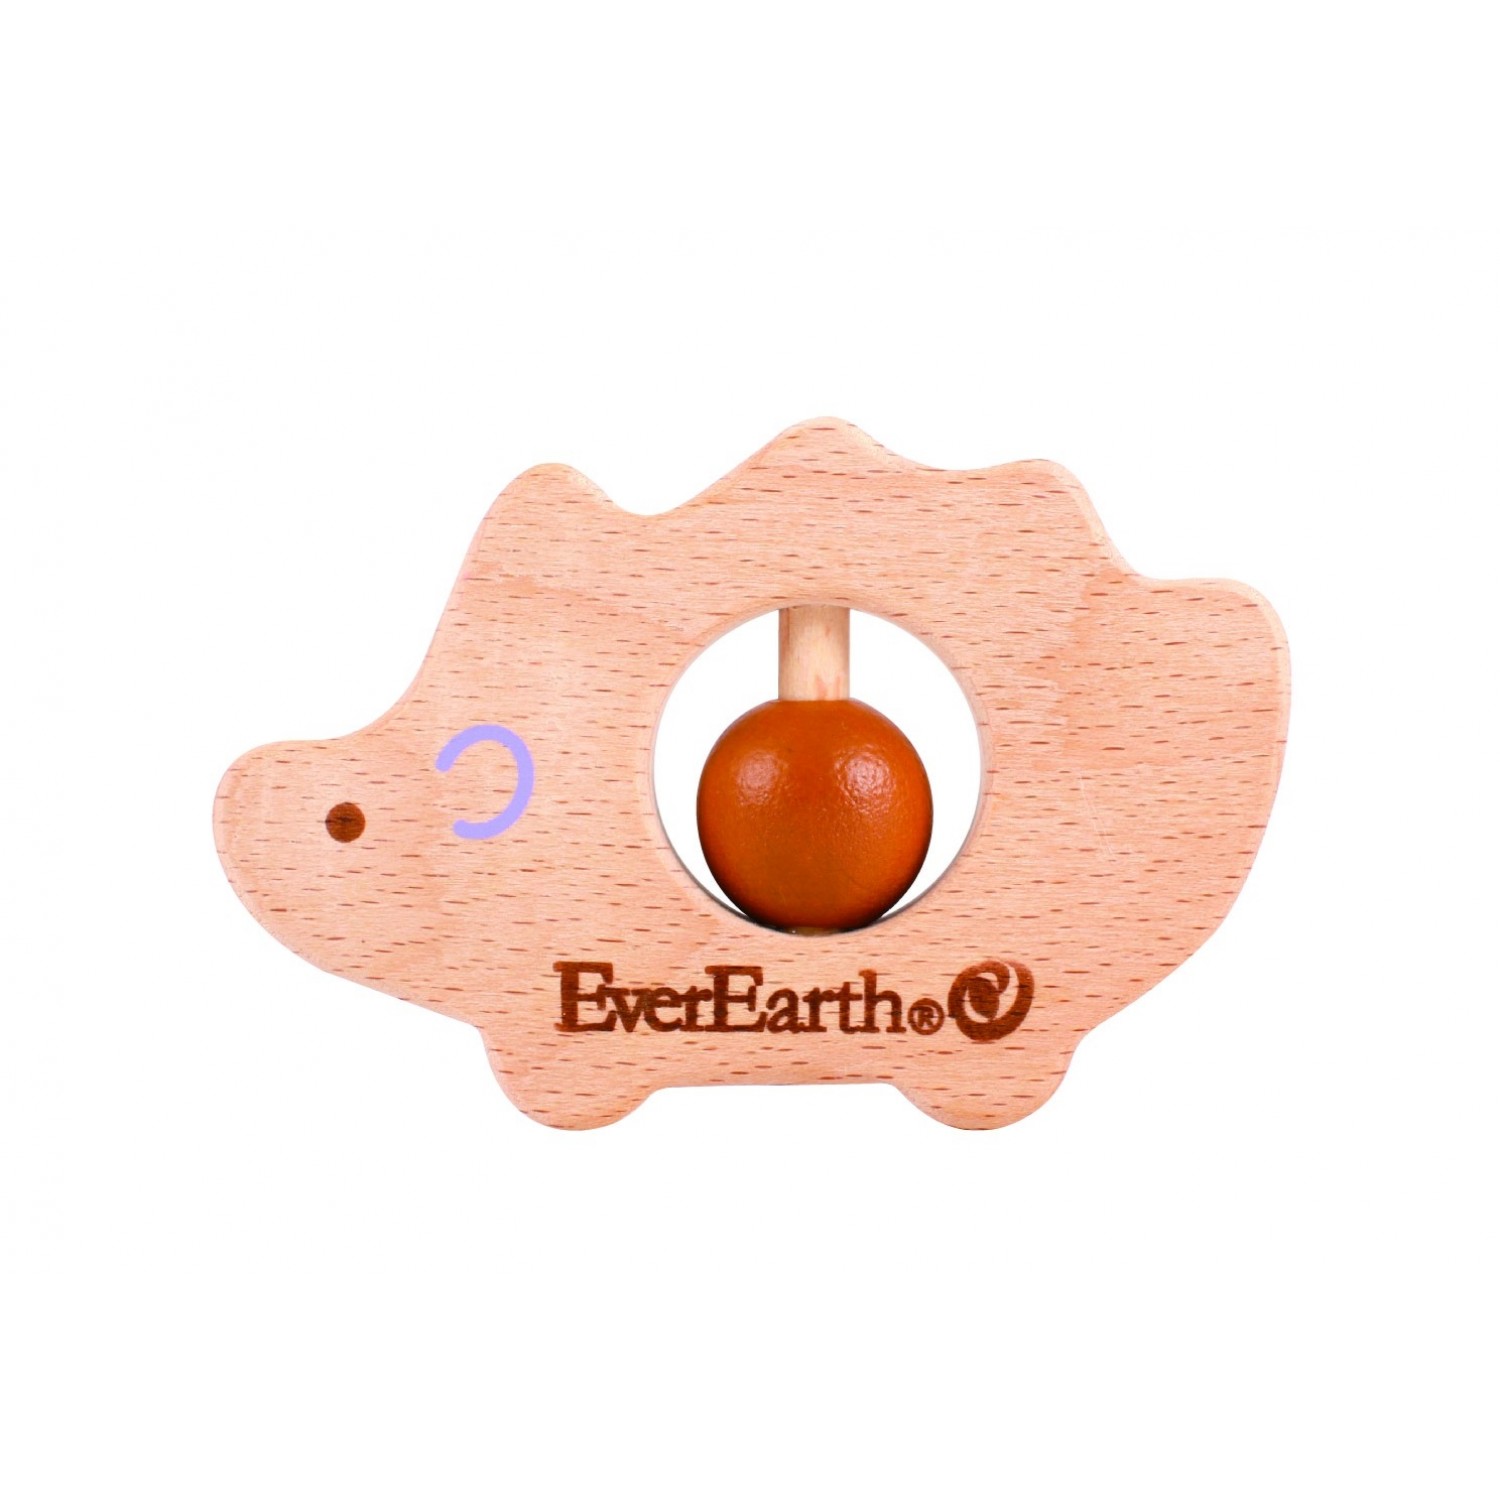 EverEarth Hedgehog grasping toy FSC® wooden toy